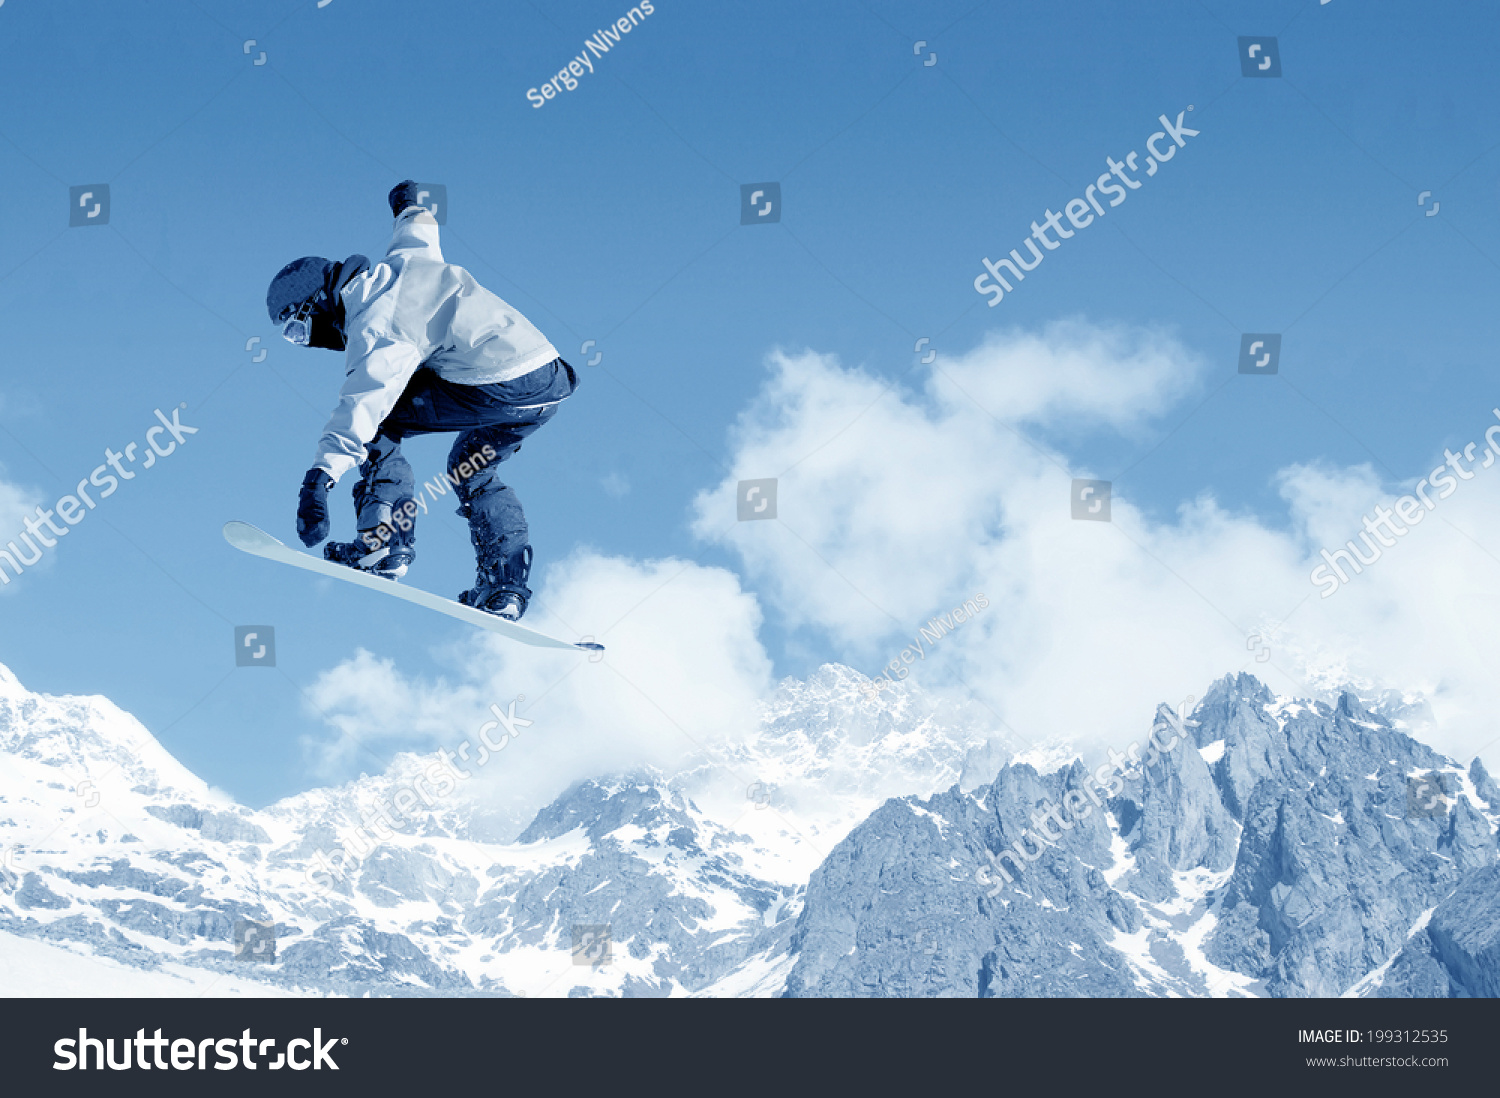 Snowboarder making jump high in clear sky #199312535